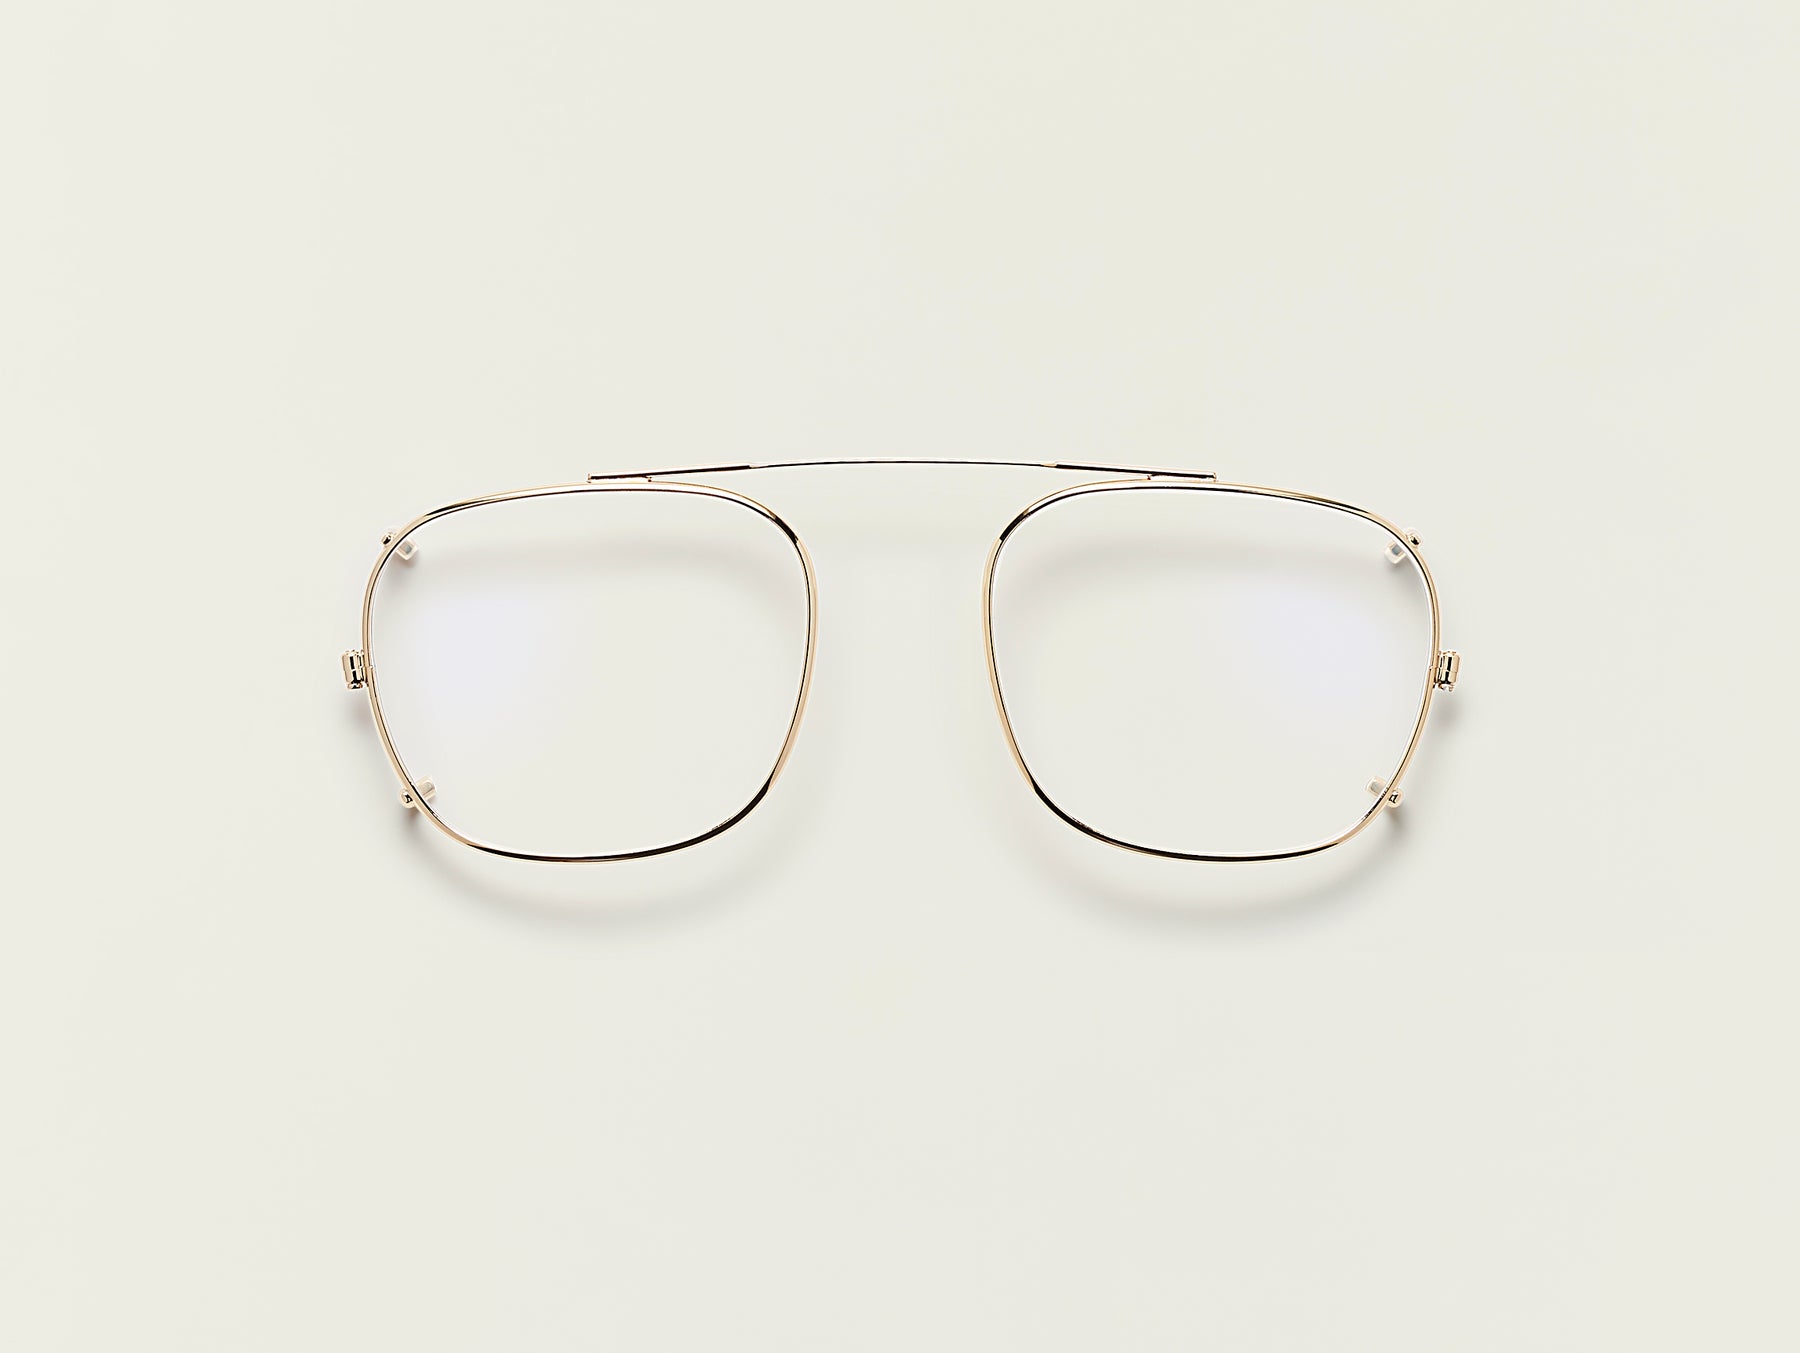 The SCHLEP CLIP in Gold with Blue Protect Lenses